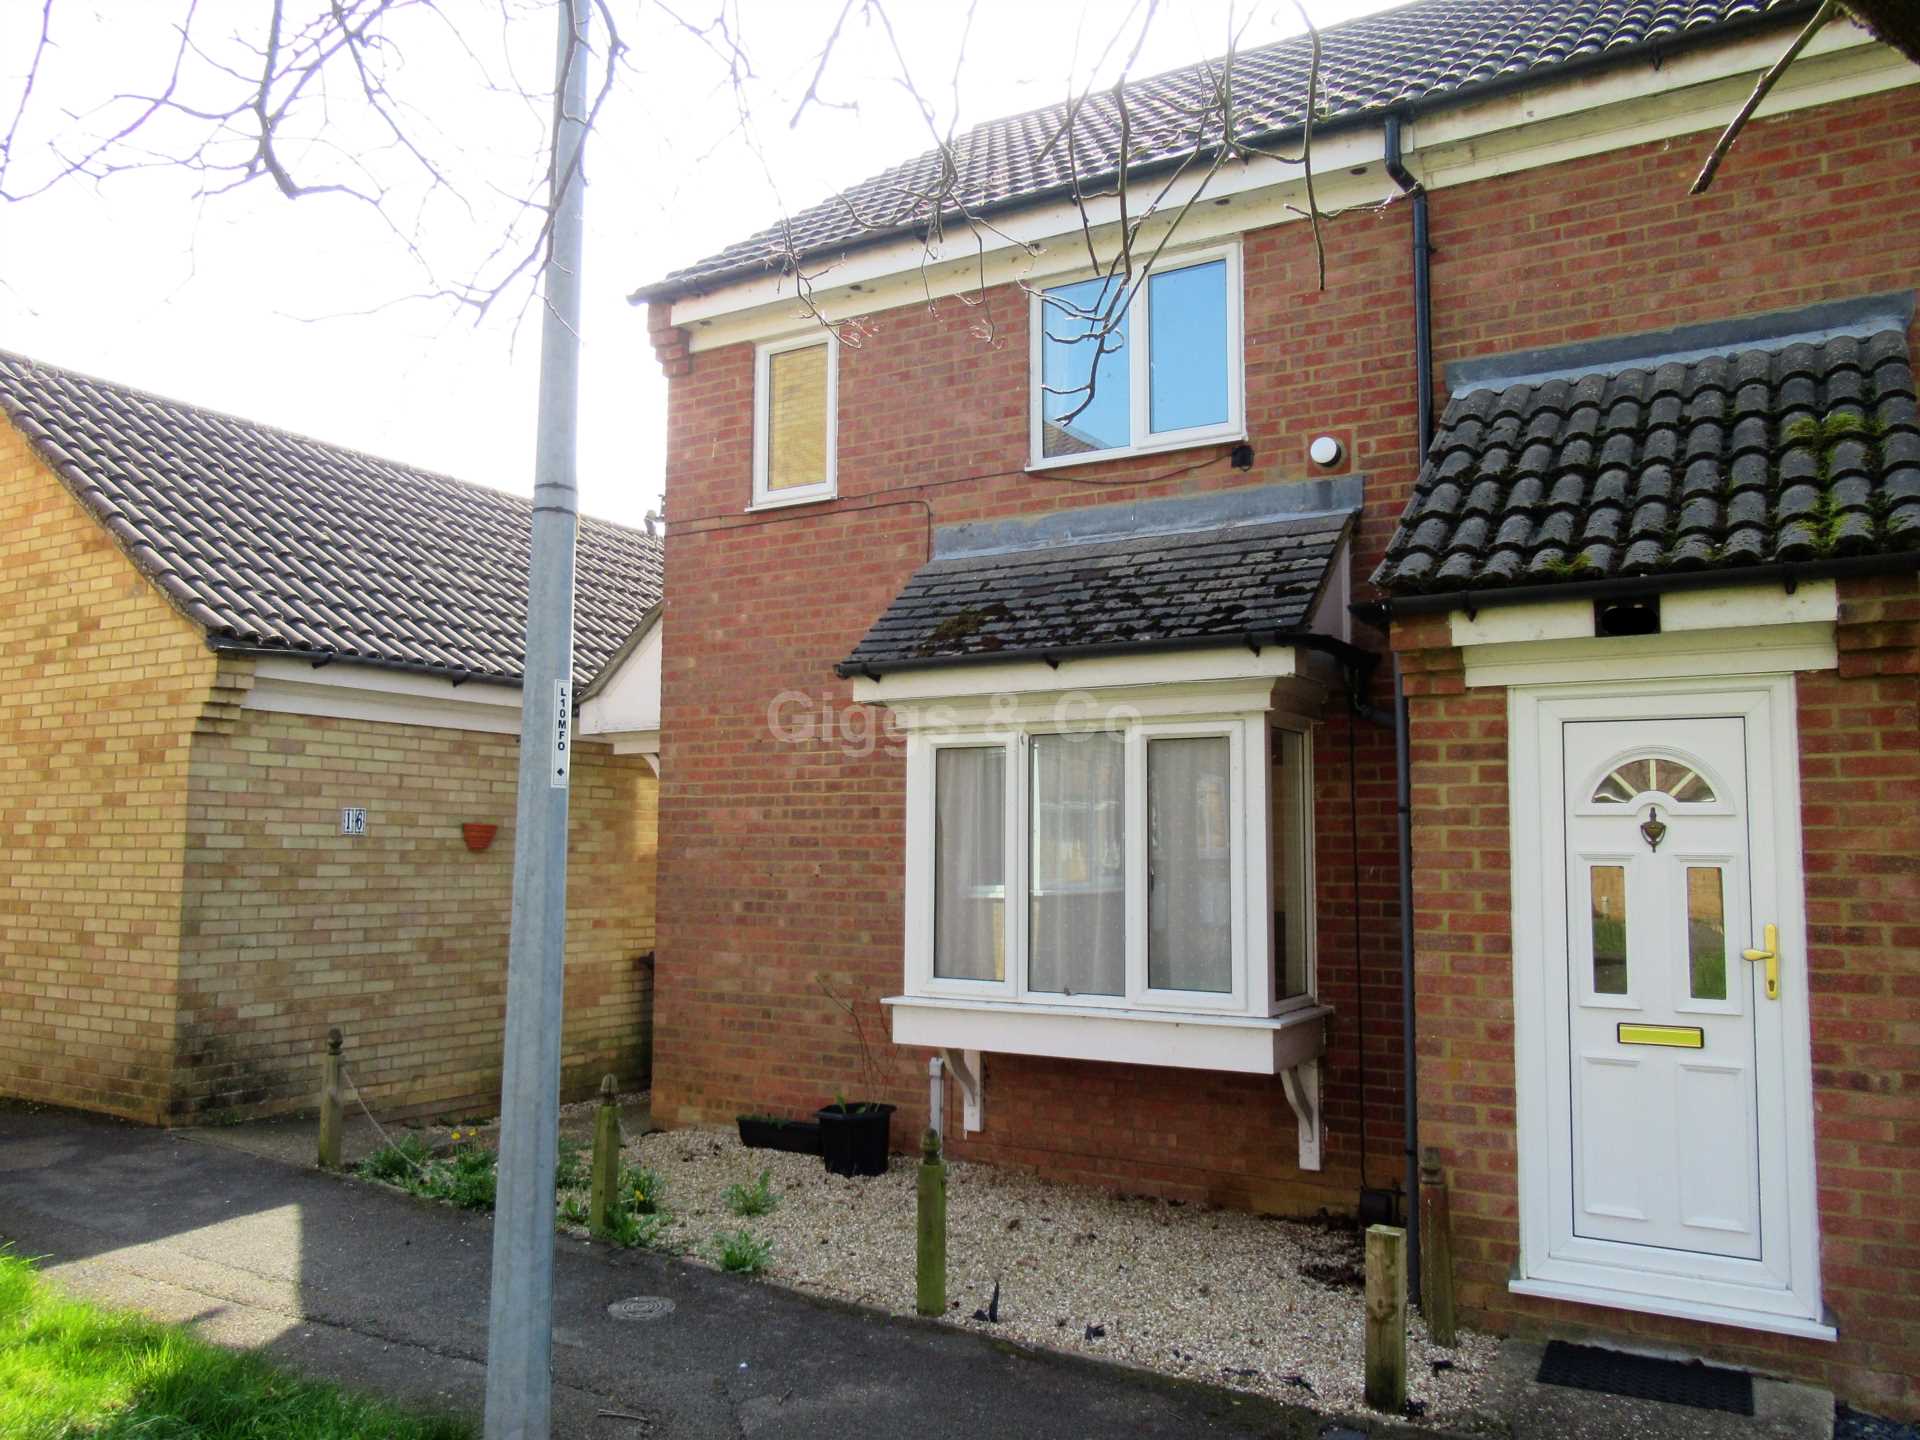 3 bed  to rent in Begwary Close, Eaton Socon - Property Image 1